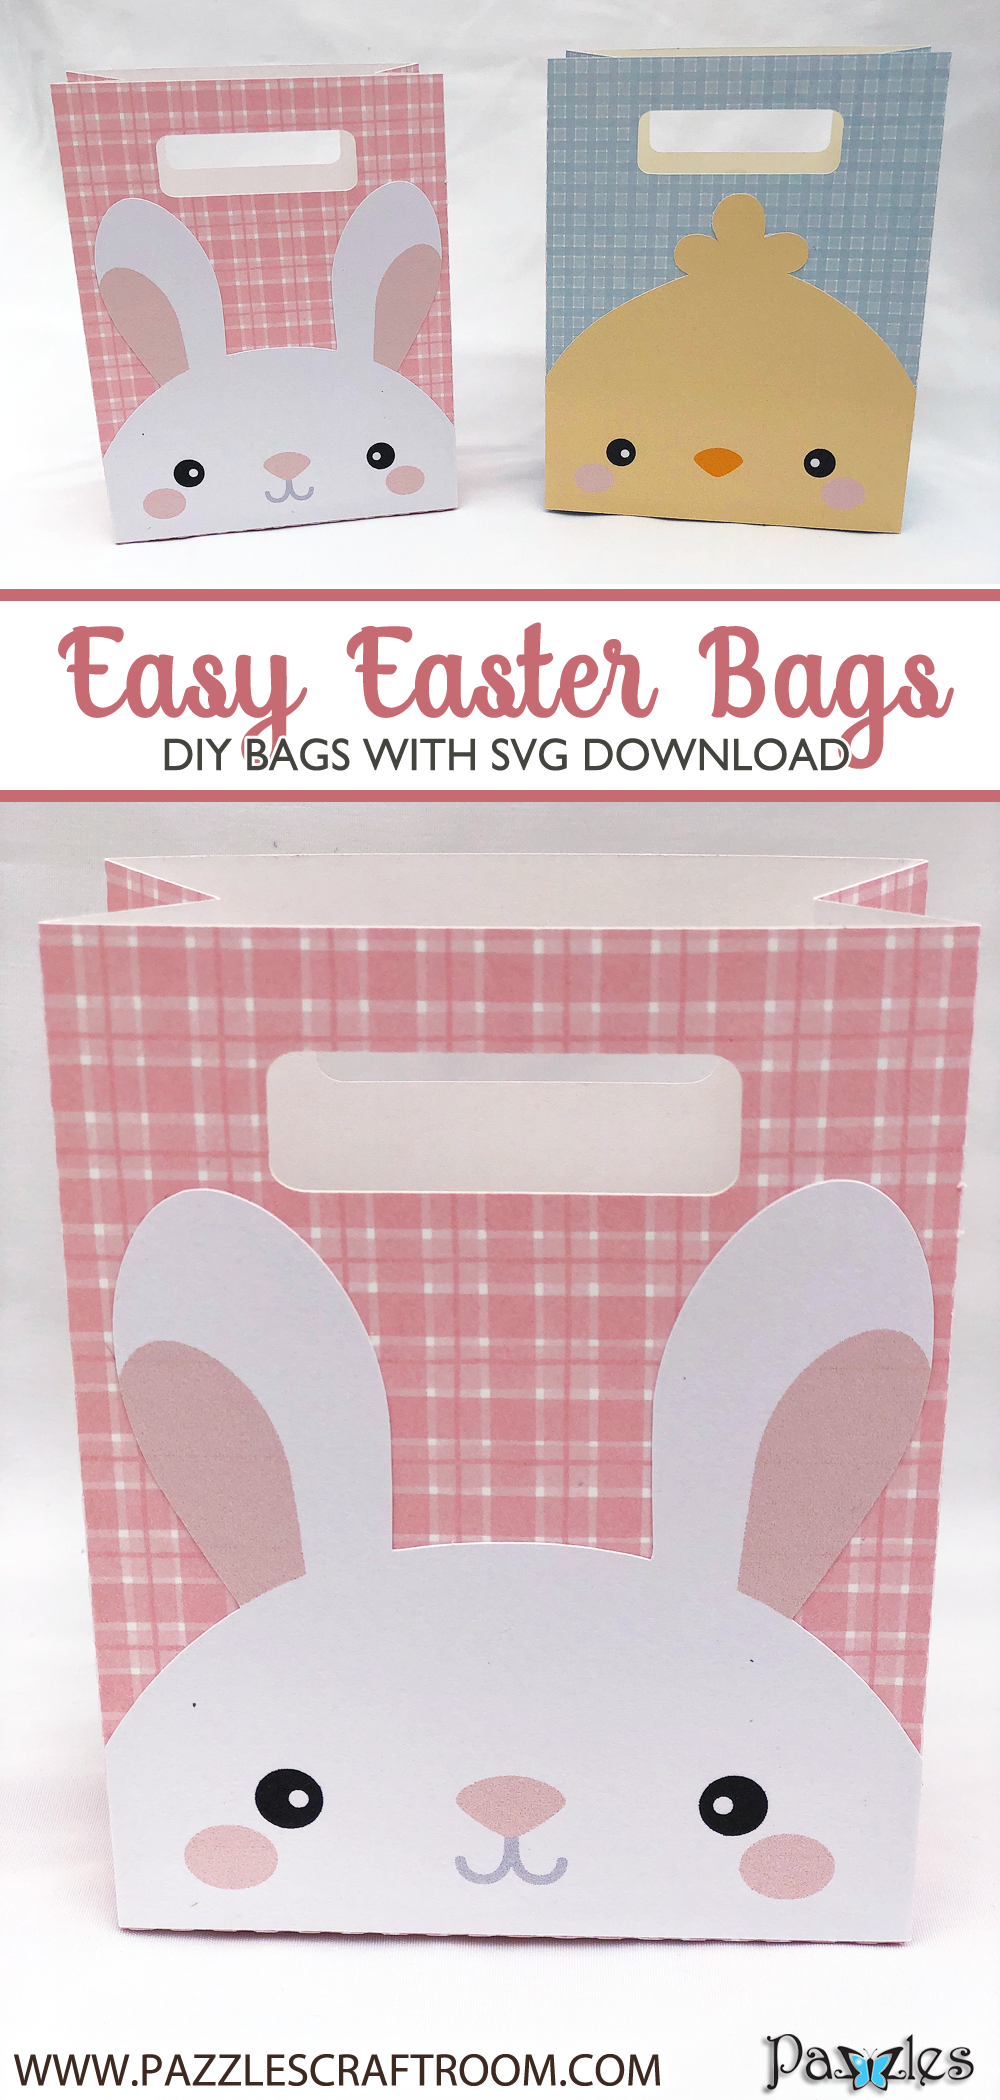 Pazzles DIY Easy Easter Bags with instant SVG download. Compatible with all major electronic cutters including Pazzles Inspiration, Cricut, and Silhouette Cameo. Design by Alma Cervantes.